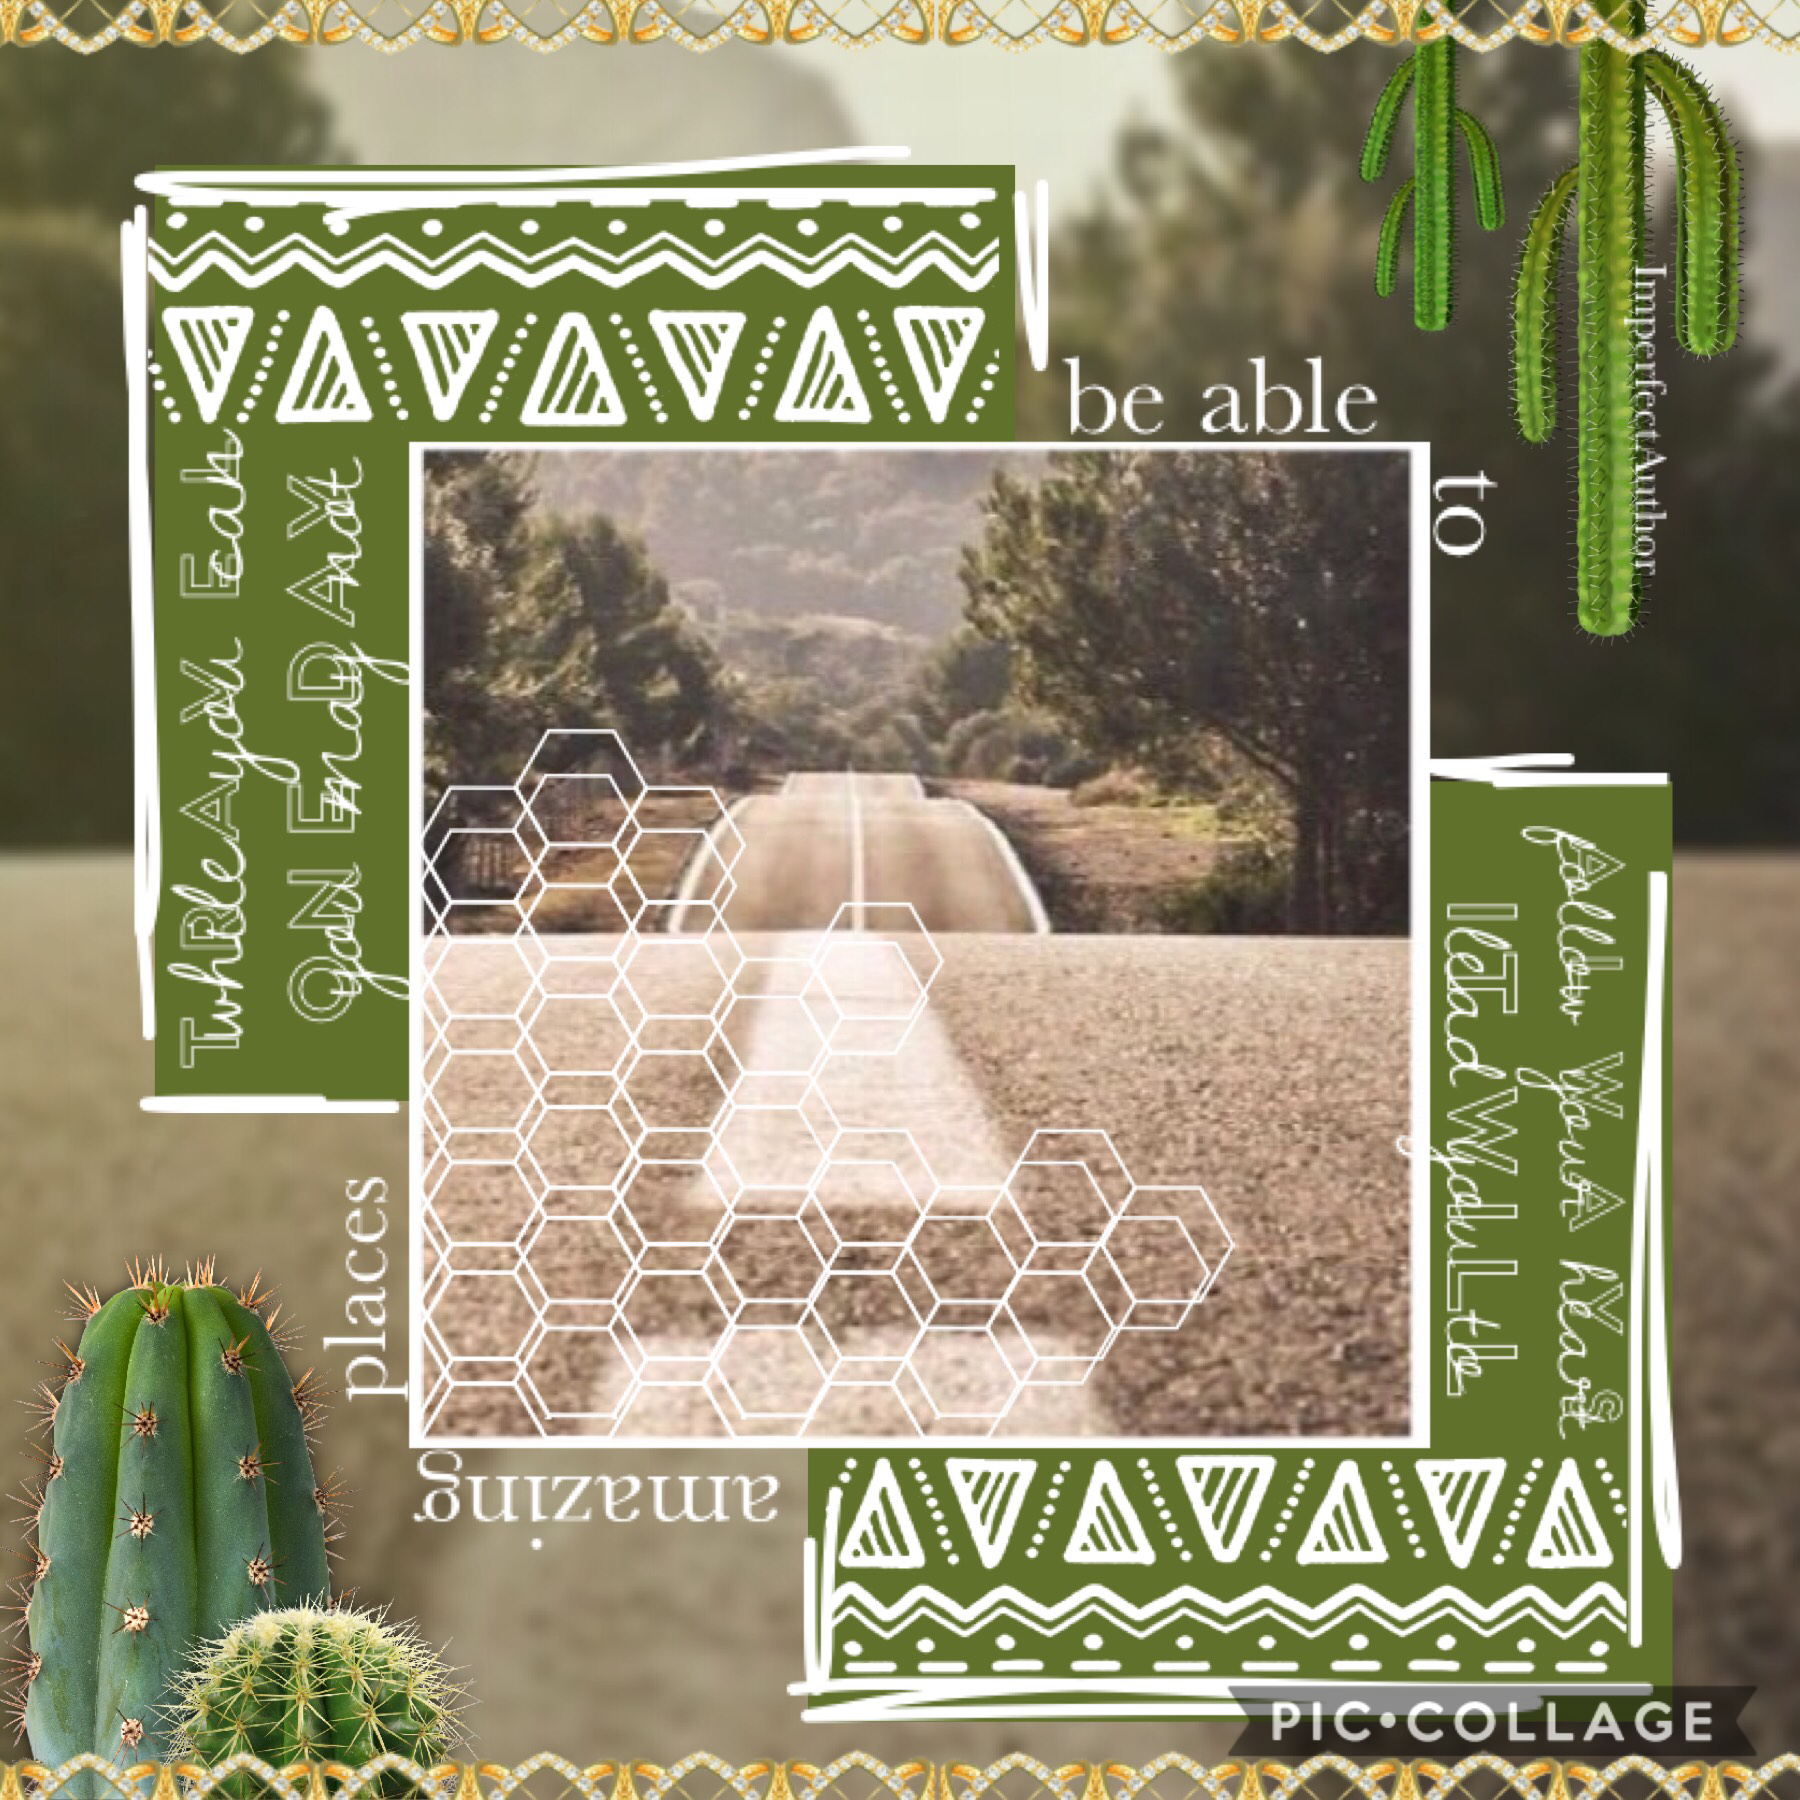 💚•Tap!•💚

Did I— did I actually make a collage? Did I really?

Lol so I made this a few days ago and was going to post it on my main but that’s on private so...

💚🍵☘️🐢🍏